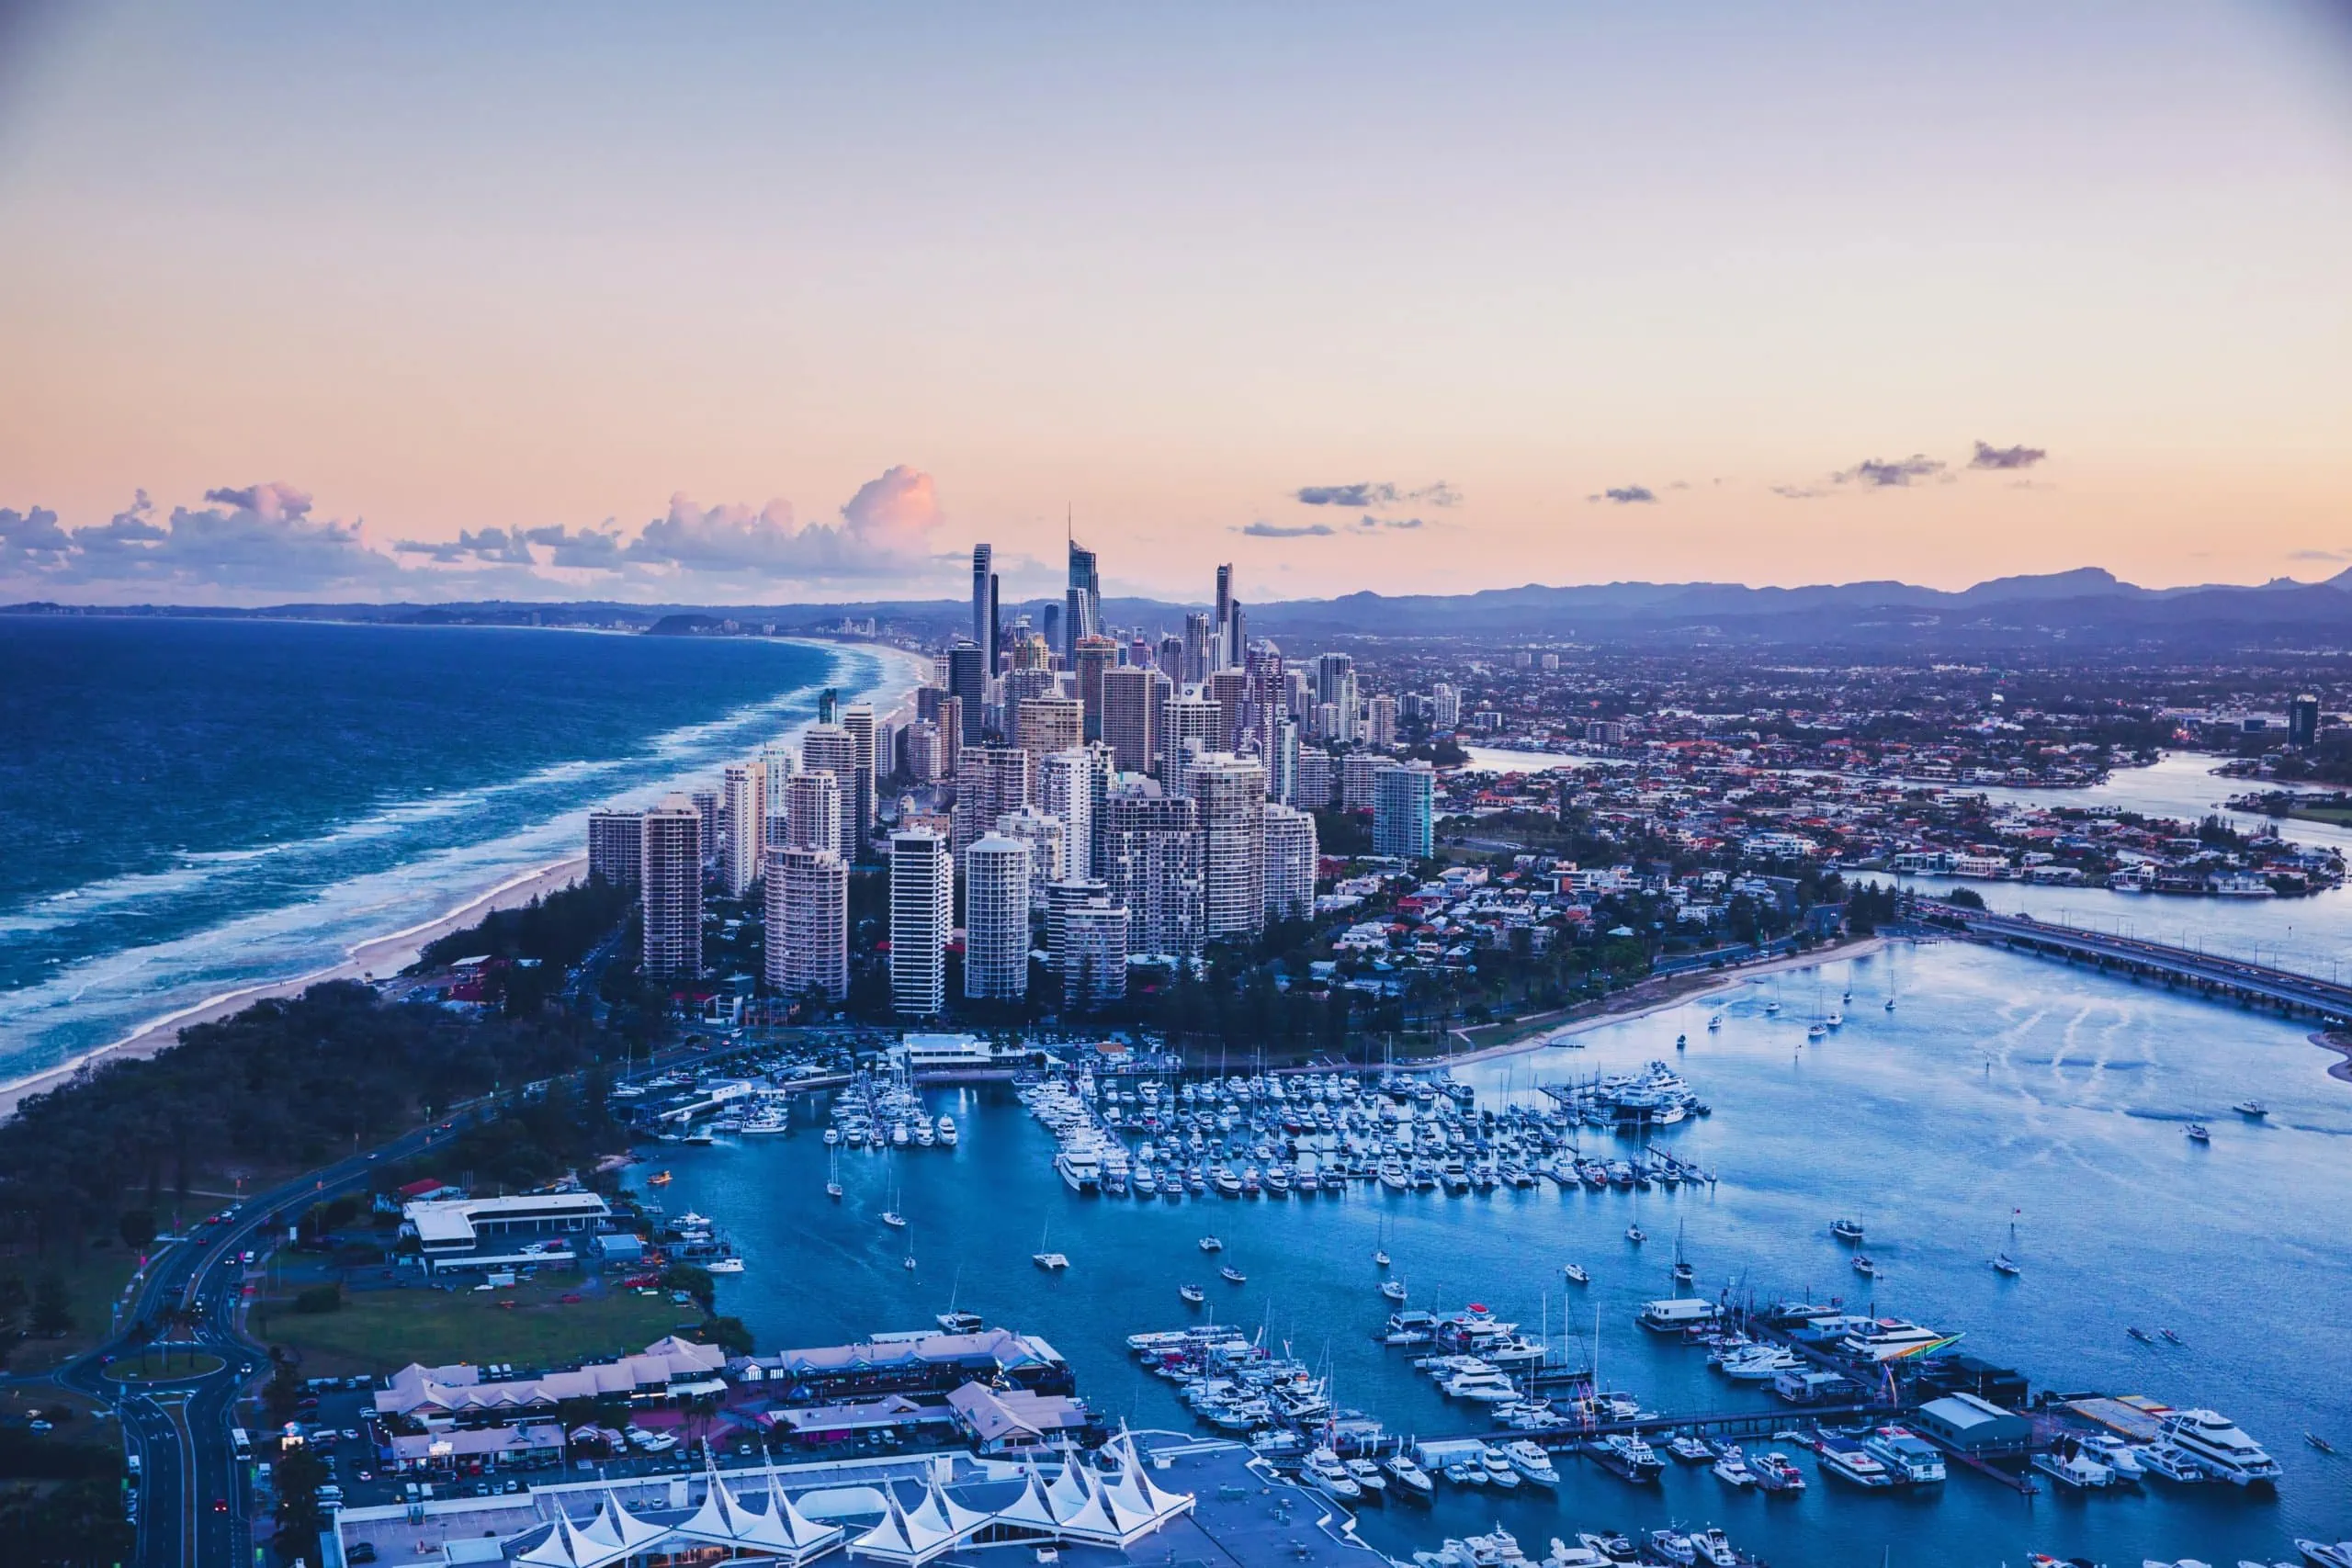 Skyline of the Gold Coast with businesses that are secure with surveillance cameras